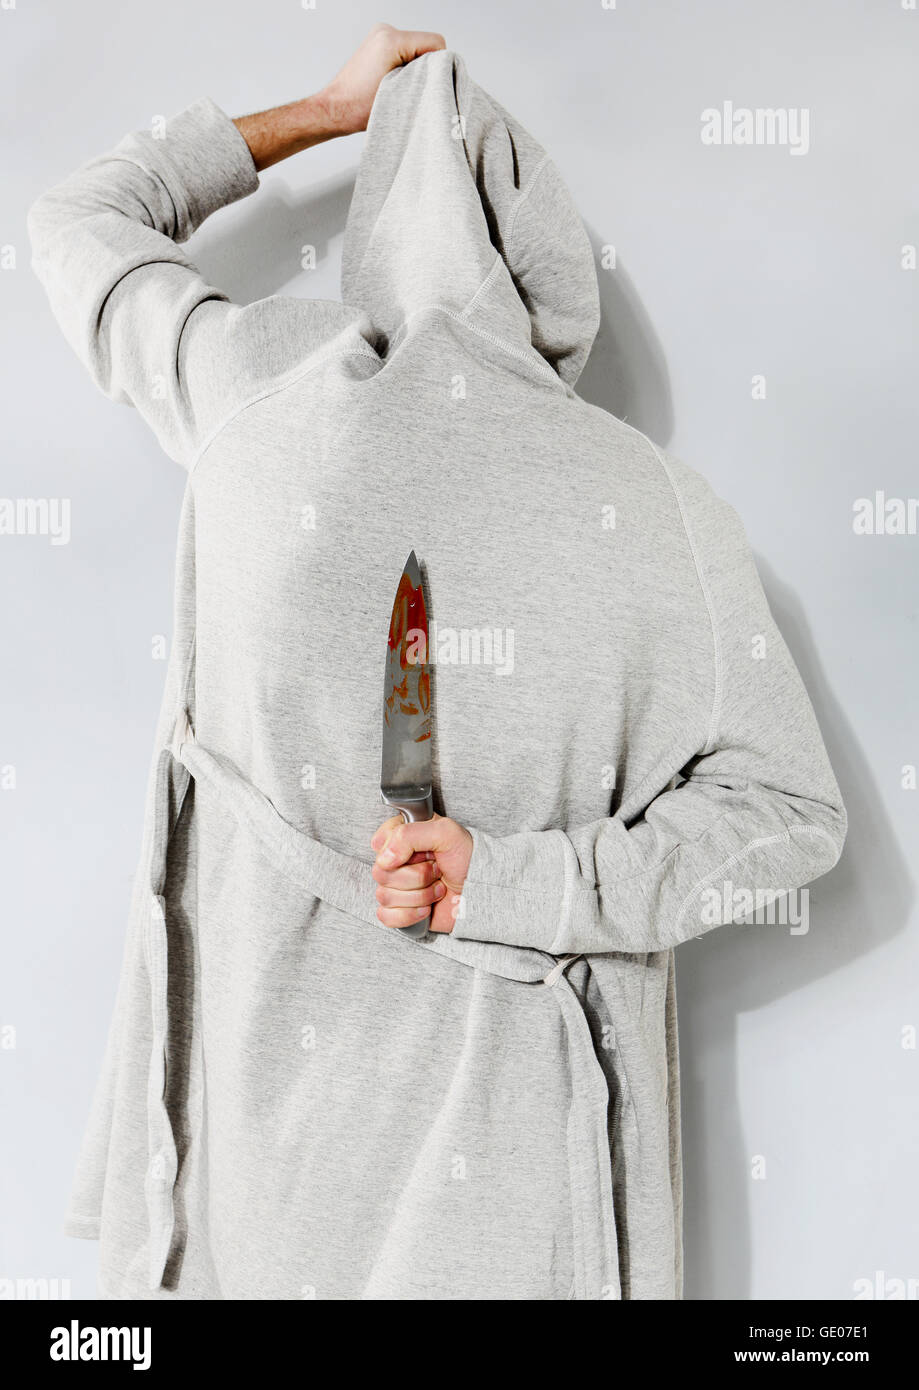 Man with a bloody knife on a gray background. Stock Photo